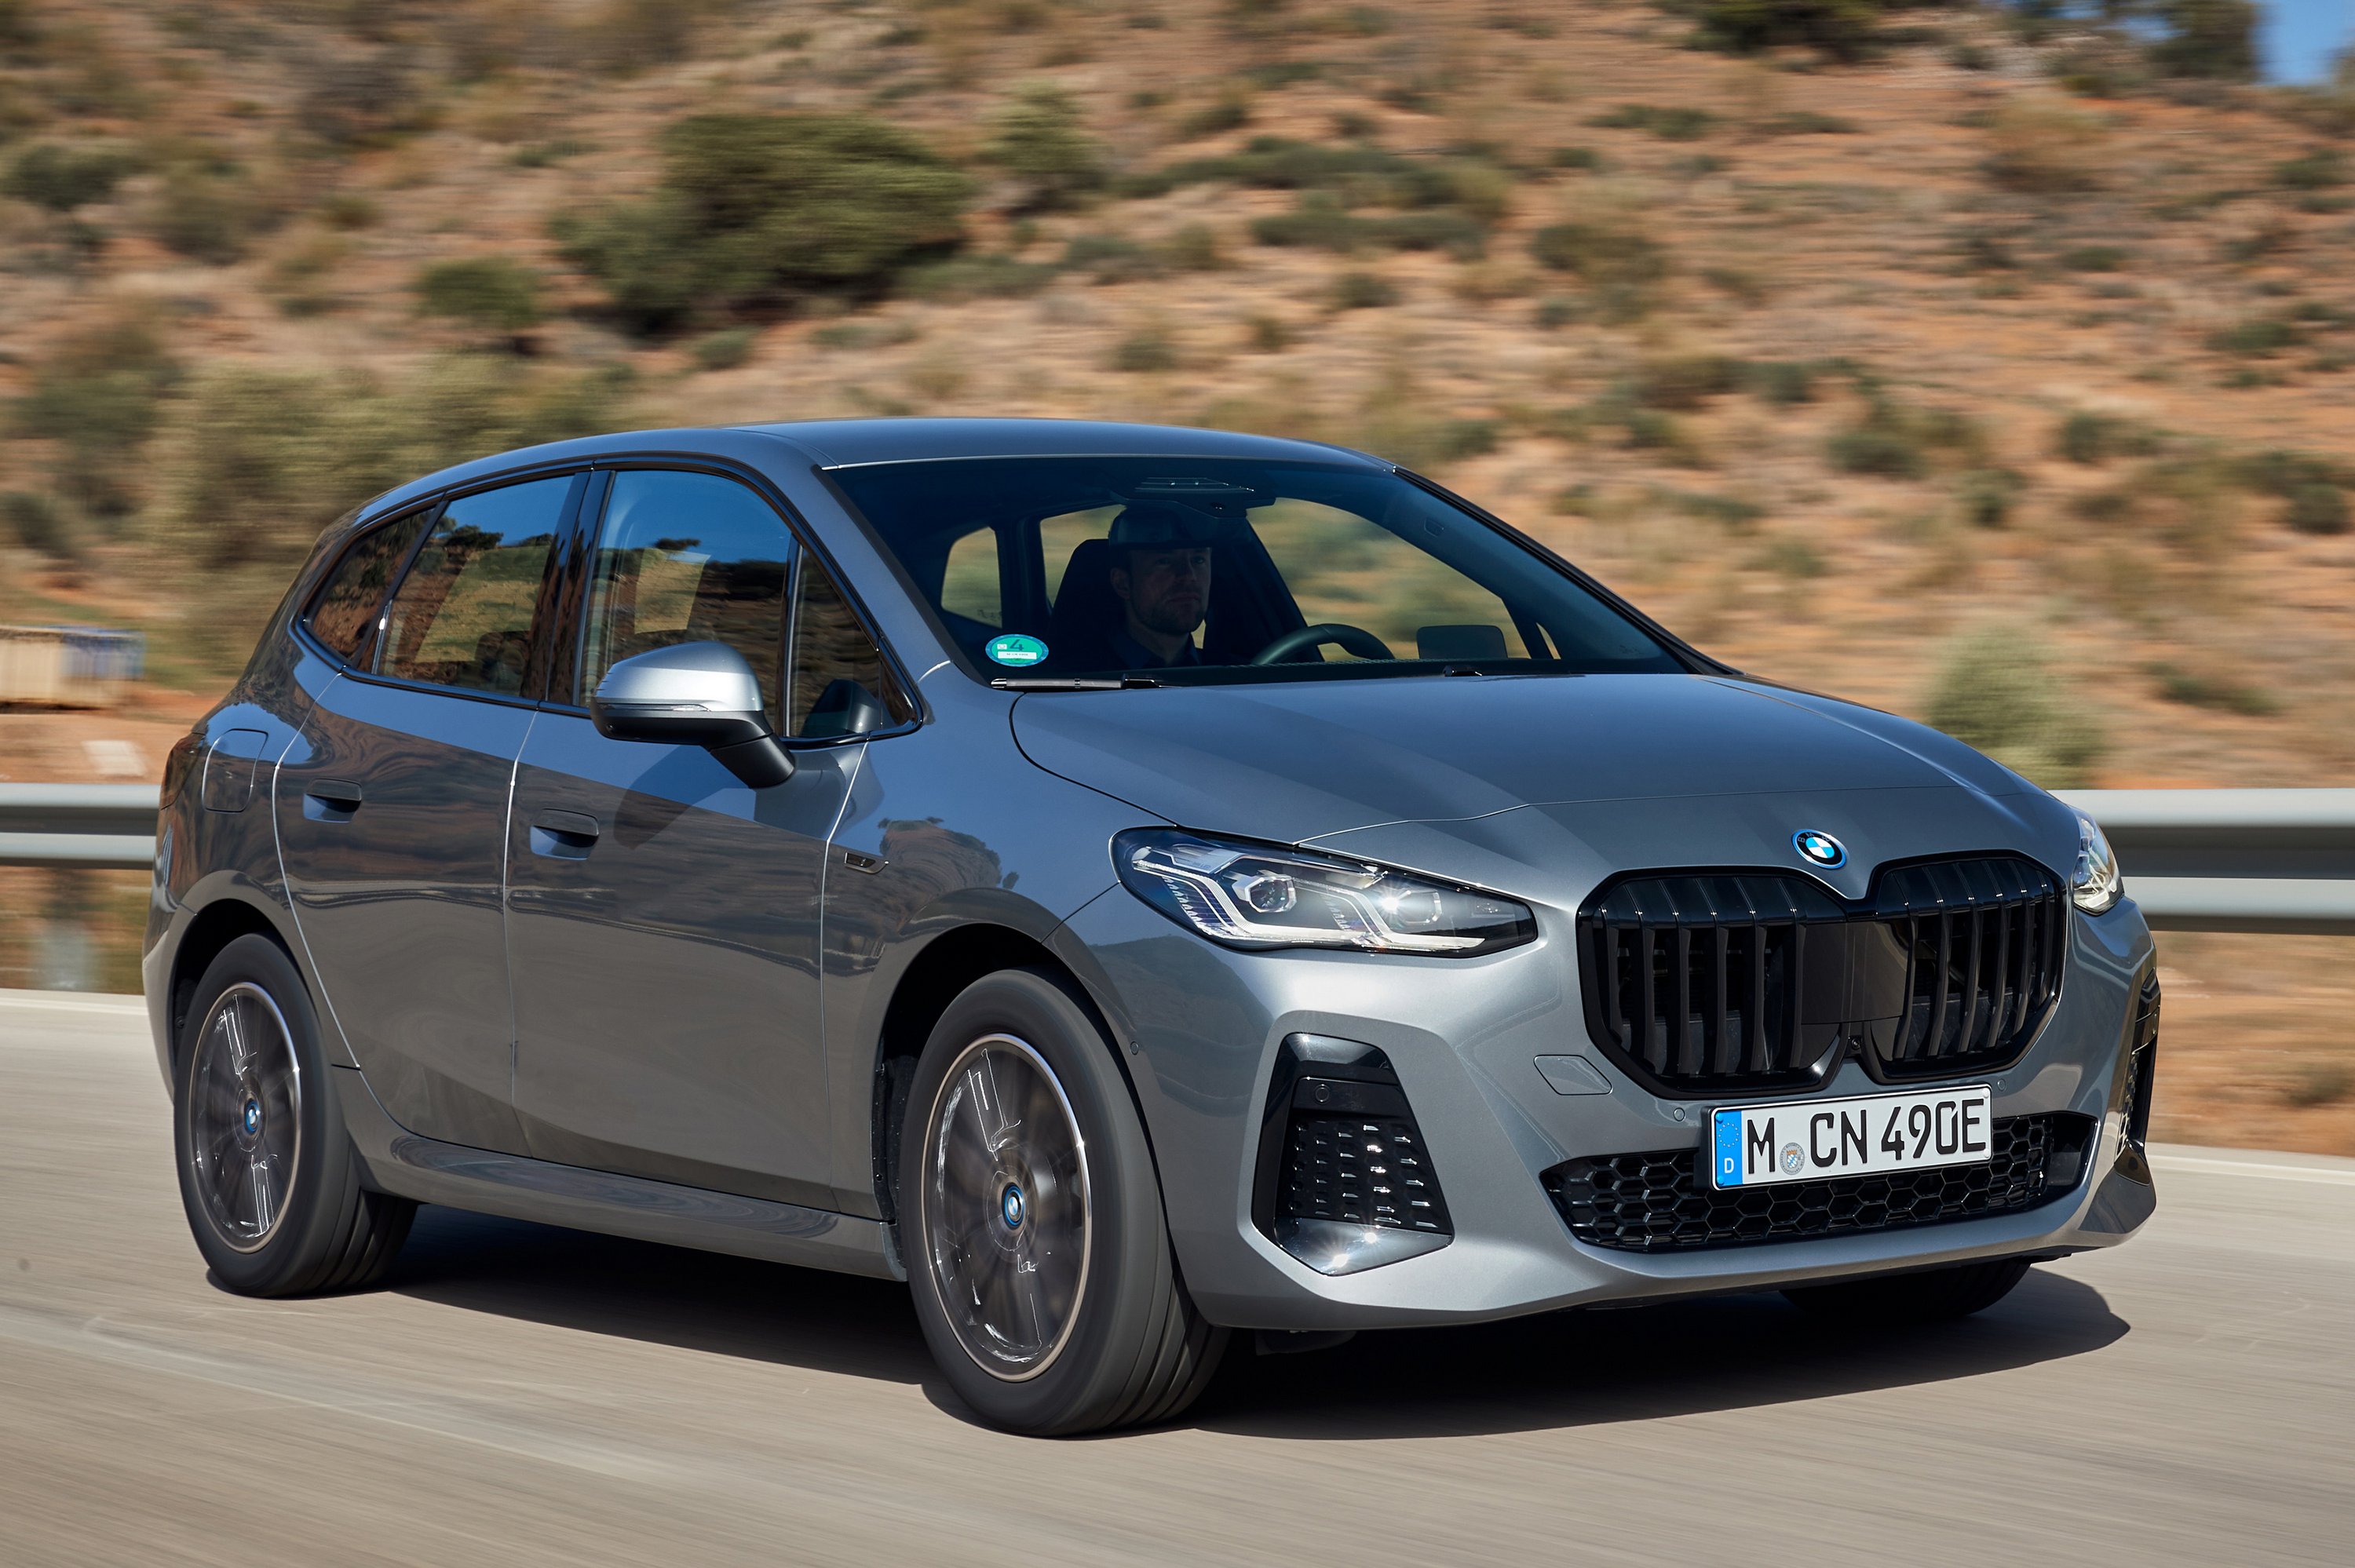 The BMW family SUV gets a large 5 . diesel engine